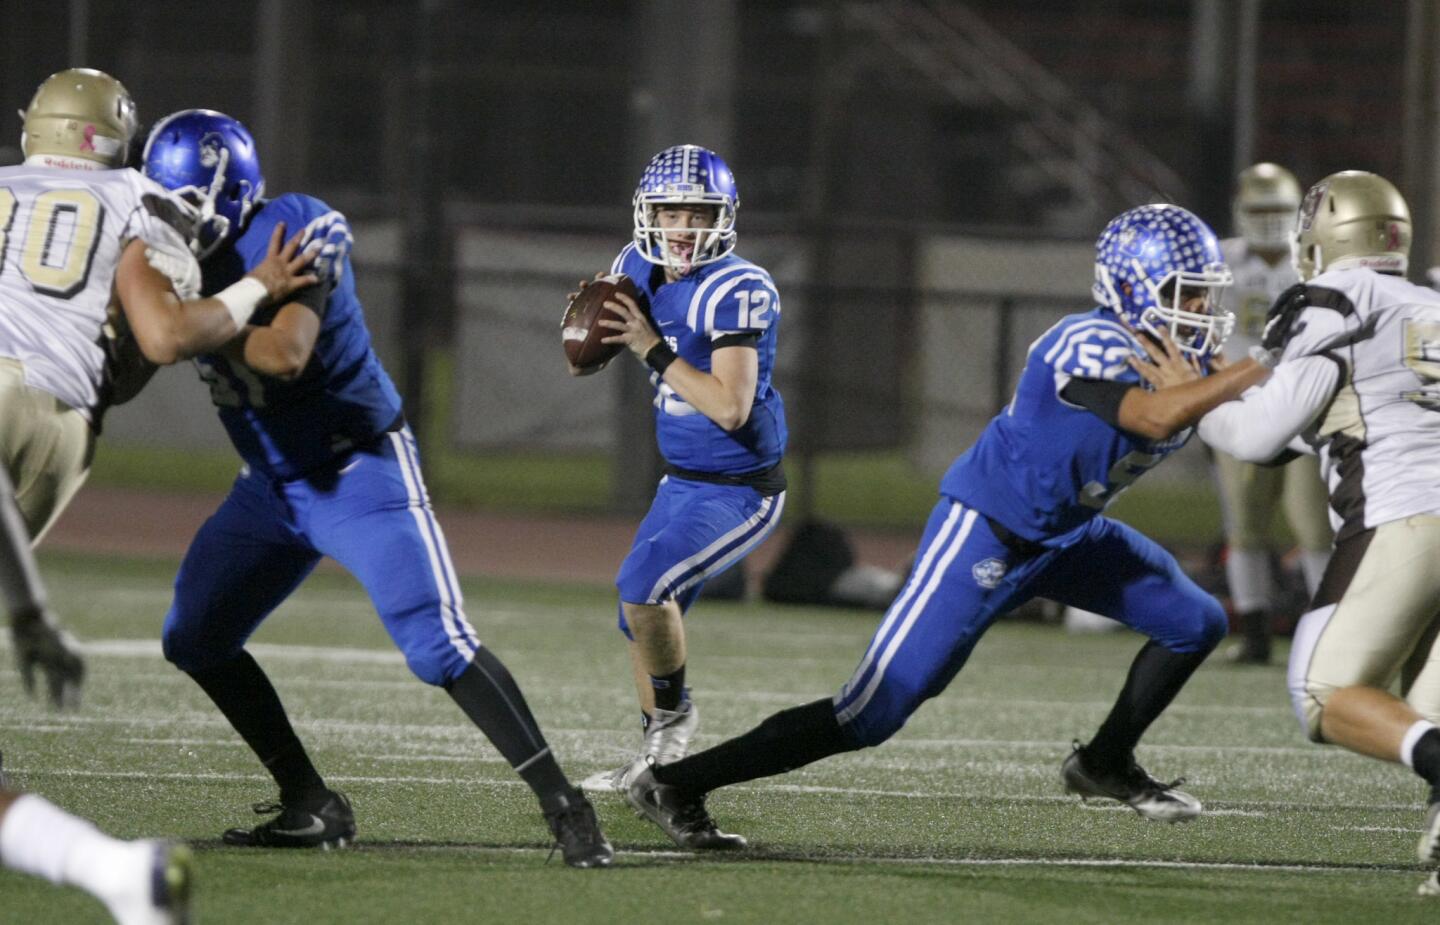 Burbank High School football player #12 quarterback Guy Gibbs looks to pass against the Don Lugo High School quarterback in CIF Southern Section Div. VIII semifinal game at home in Burbank on Friday, Nov. 25, 2016.